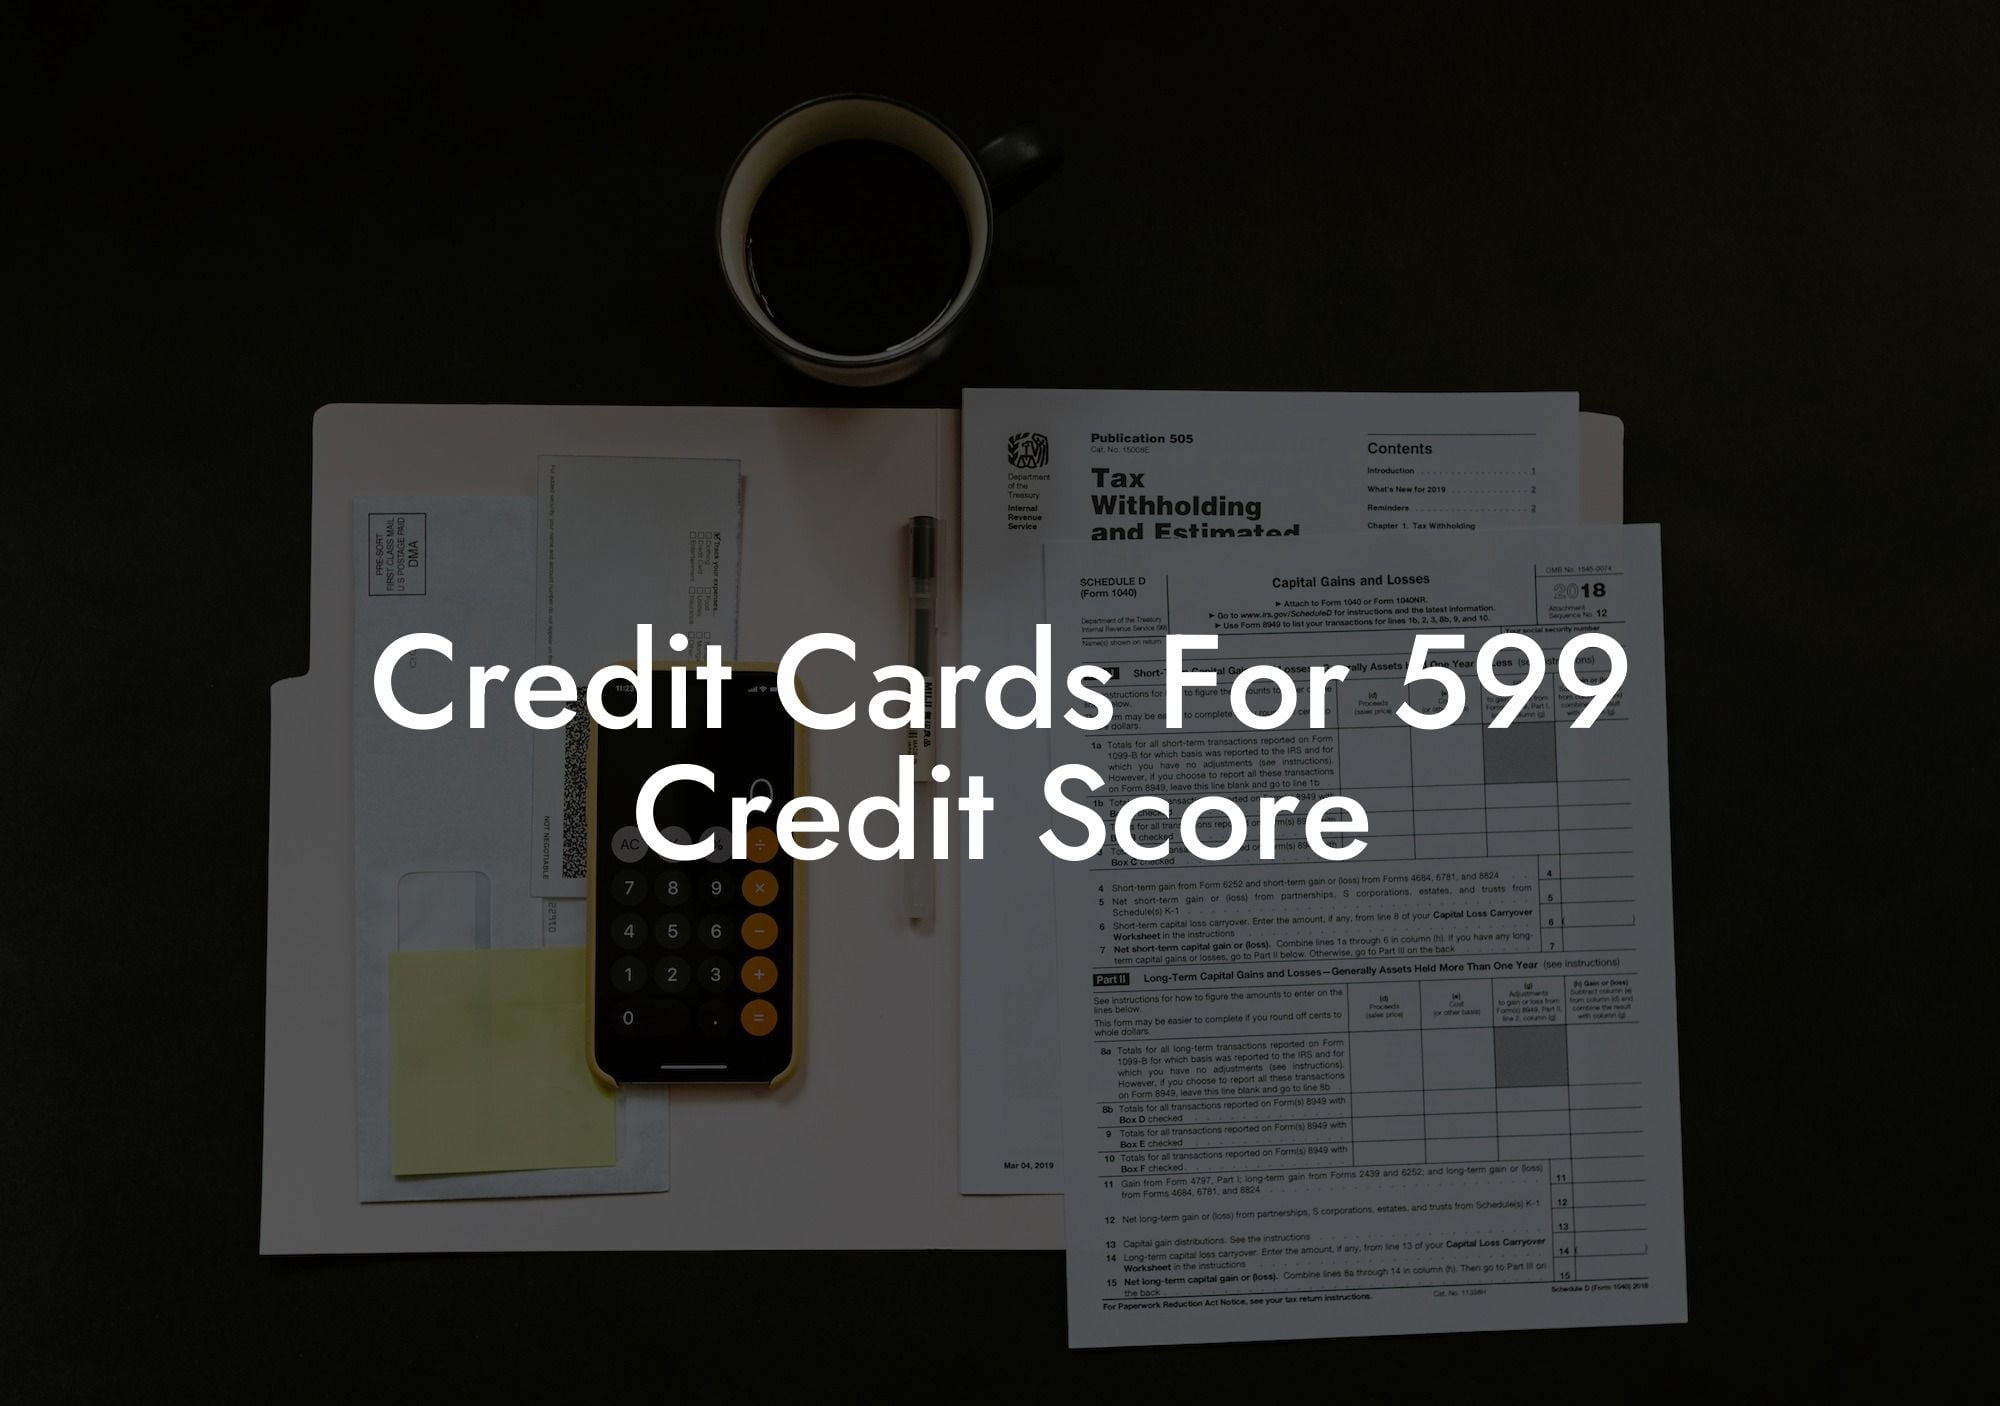 Credit Cards For 599 Credit Score